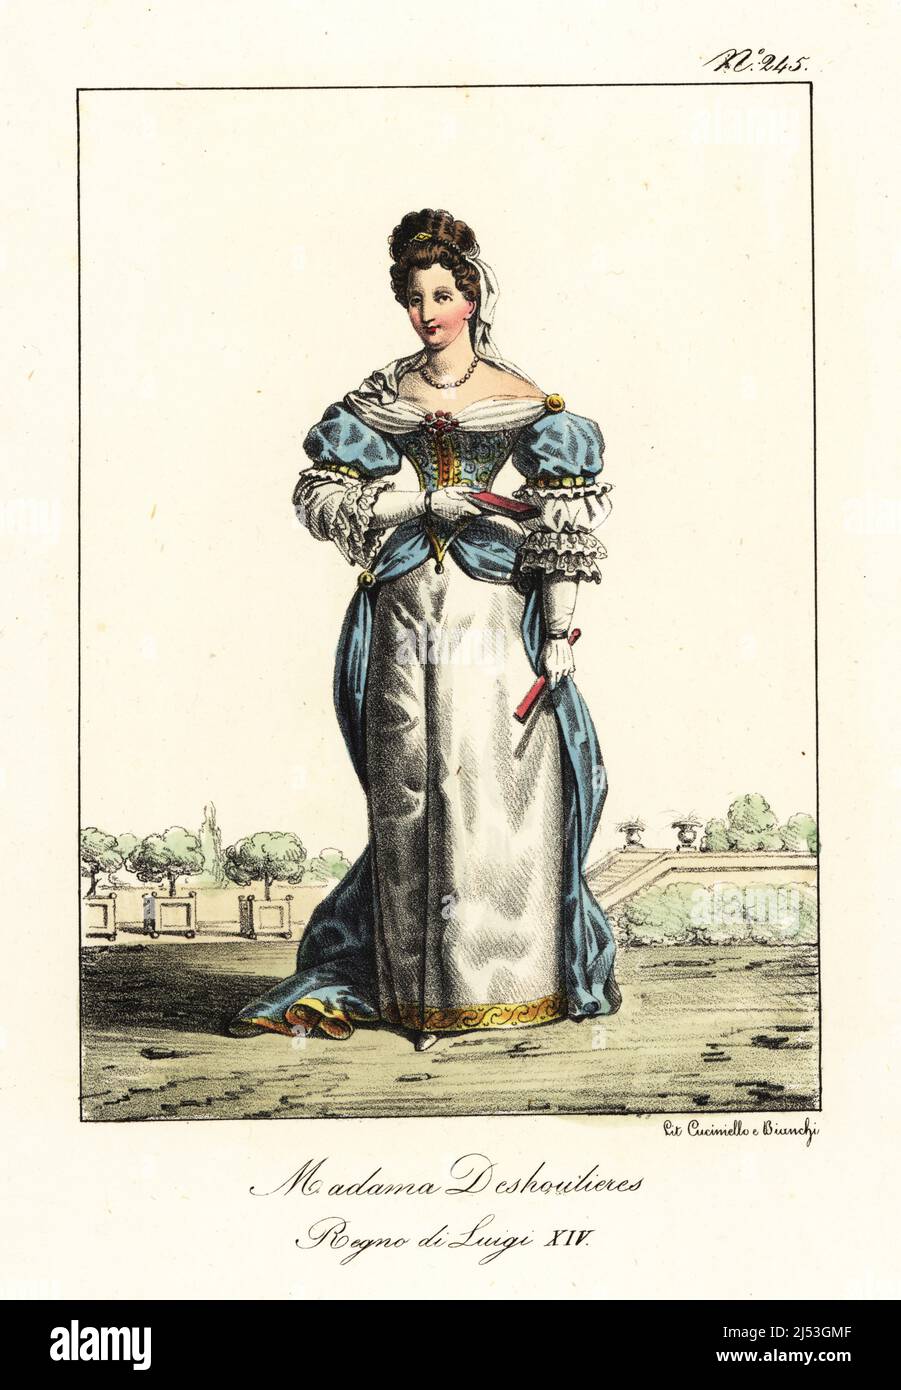 Antoinette Du Ligier de la Garde Deshoulières, 1638-1694, French poet at the court of King Louis XIV and literary society. In low-cut gown, tucker, embroidered bodice, frilled sleeves, gold hemmed petticoat. Madame Deshoulieres. Regne de Louis XIV. Handcoloured lithograph by Lorenzo Bianchi and Domenico Cuciniello after Hippolyte Lecomte from Costumi civili e militari della monarchia francese dal 1200 al 1820, Naples, 1825. Italian edition of Lecomte’s Civilian and military costumes of the French monarchy from 1200 to 1820. Stock Photo